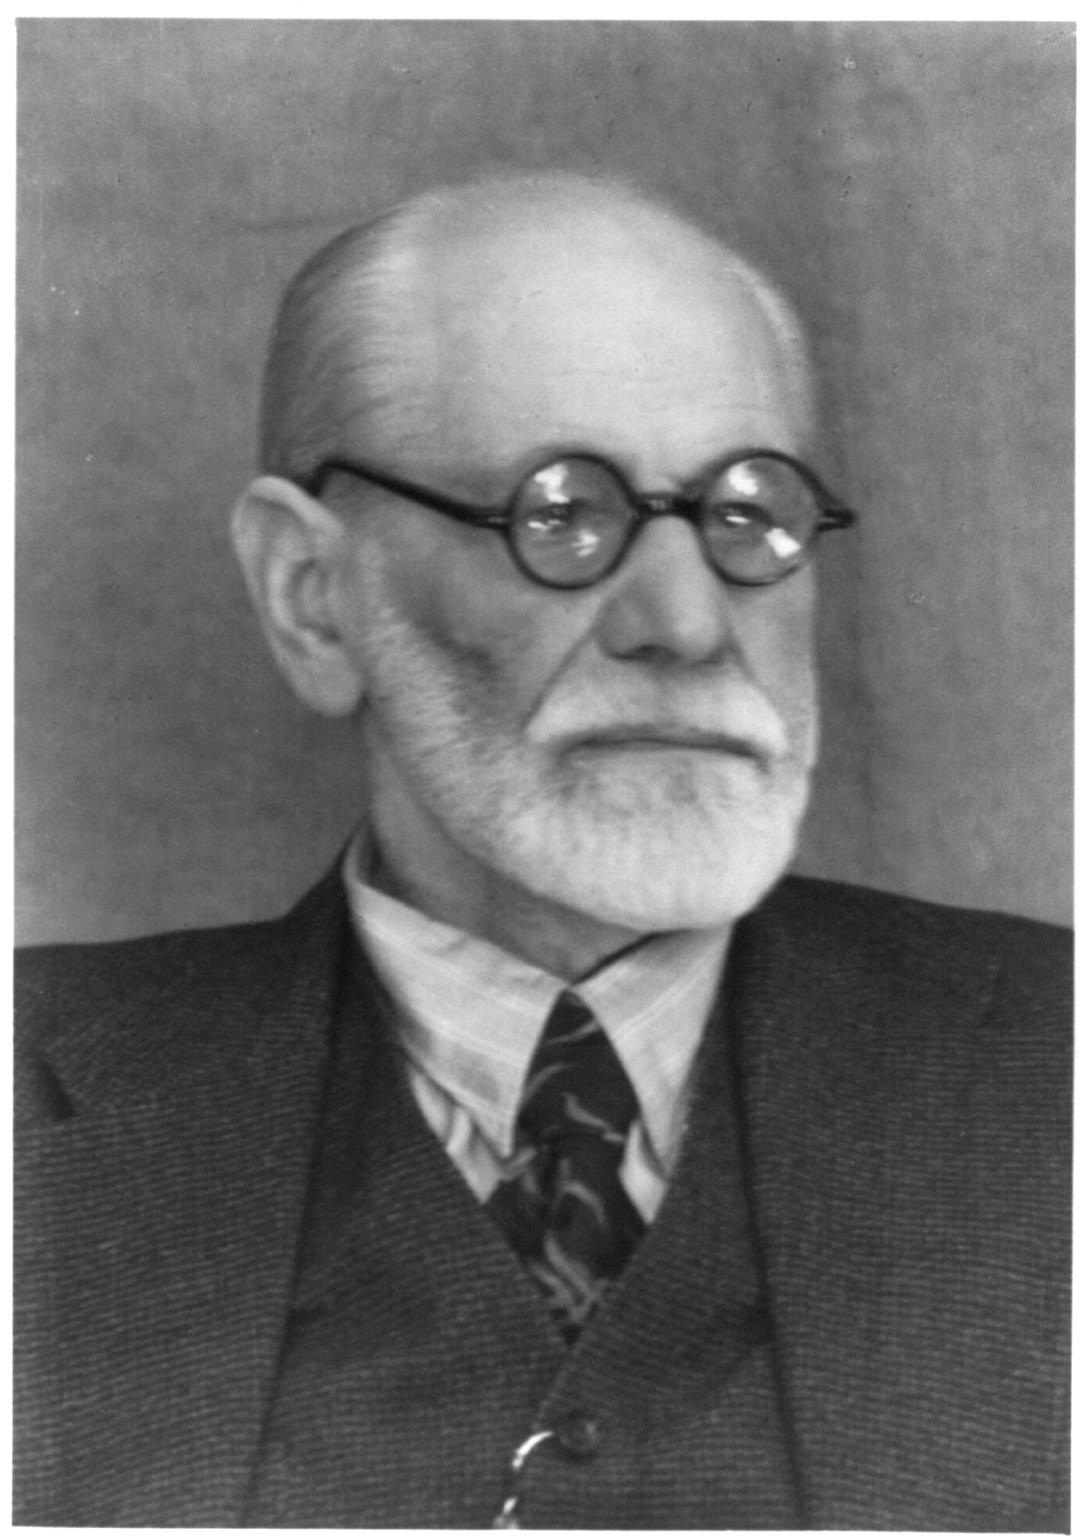 what two categories of dream content did sigmund freud describe